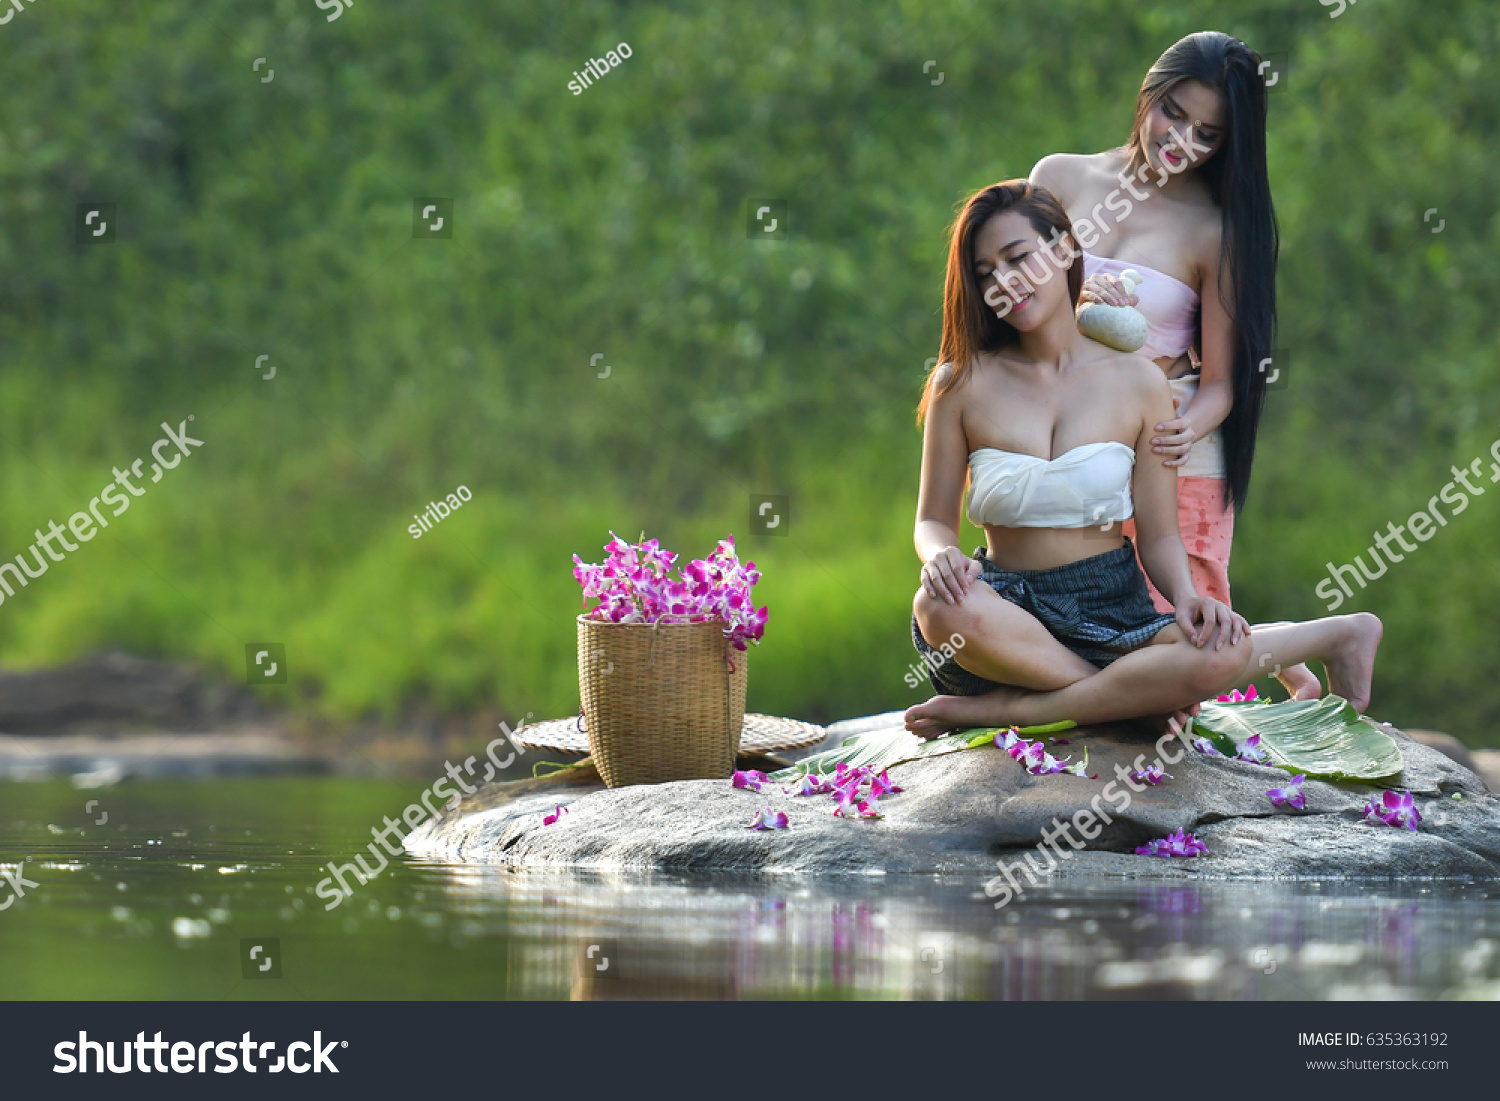 Two Beauties Giving Nice Massage to Each Other